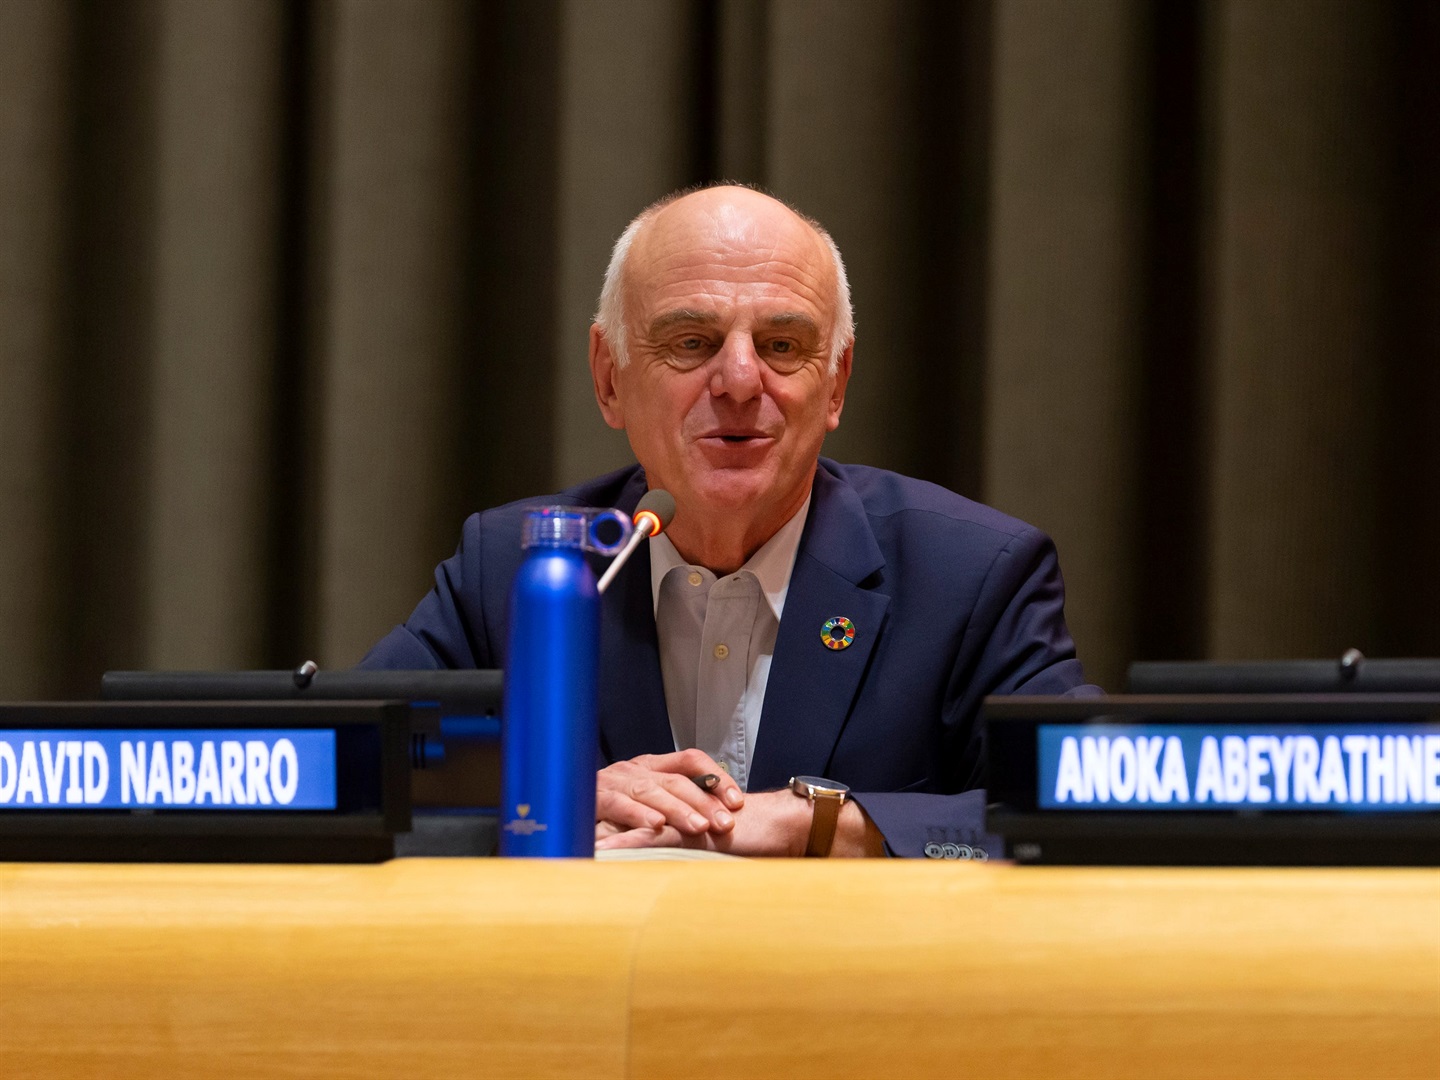 David Nabarro at launch EAT-Lancet Commission Report on Food, Planet, Health at United Nations Headquarters on February 5, 2019. Photo by Lev Radin/Pacific Press/LightRocket via Getty Images